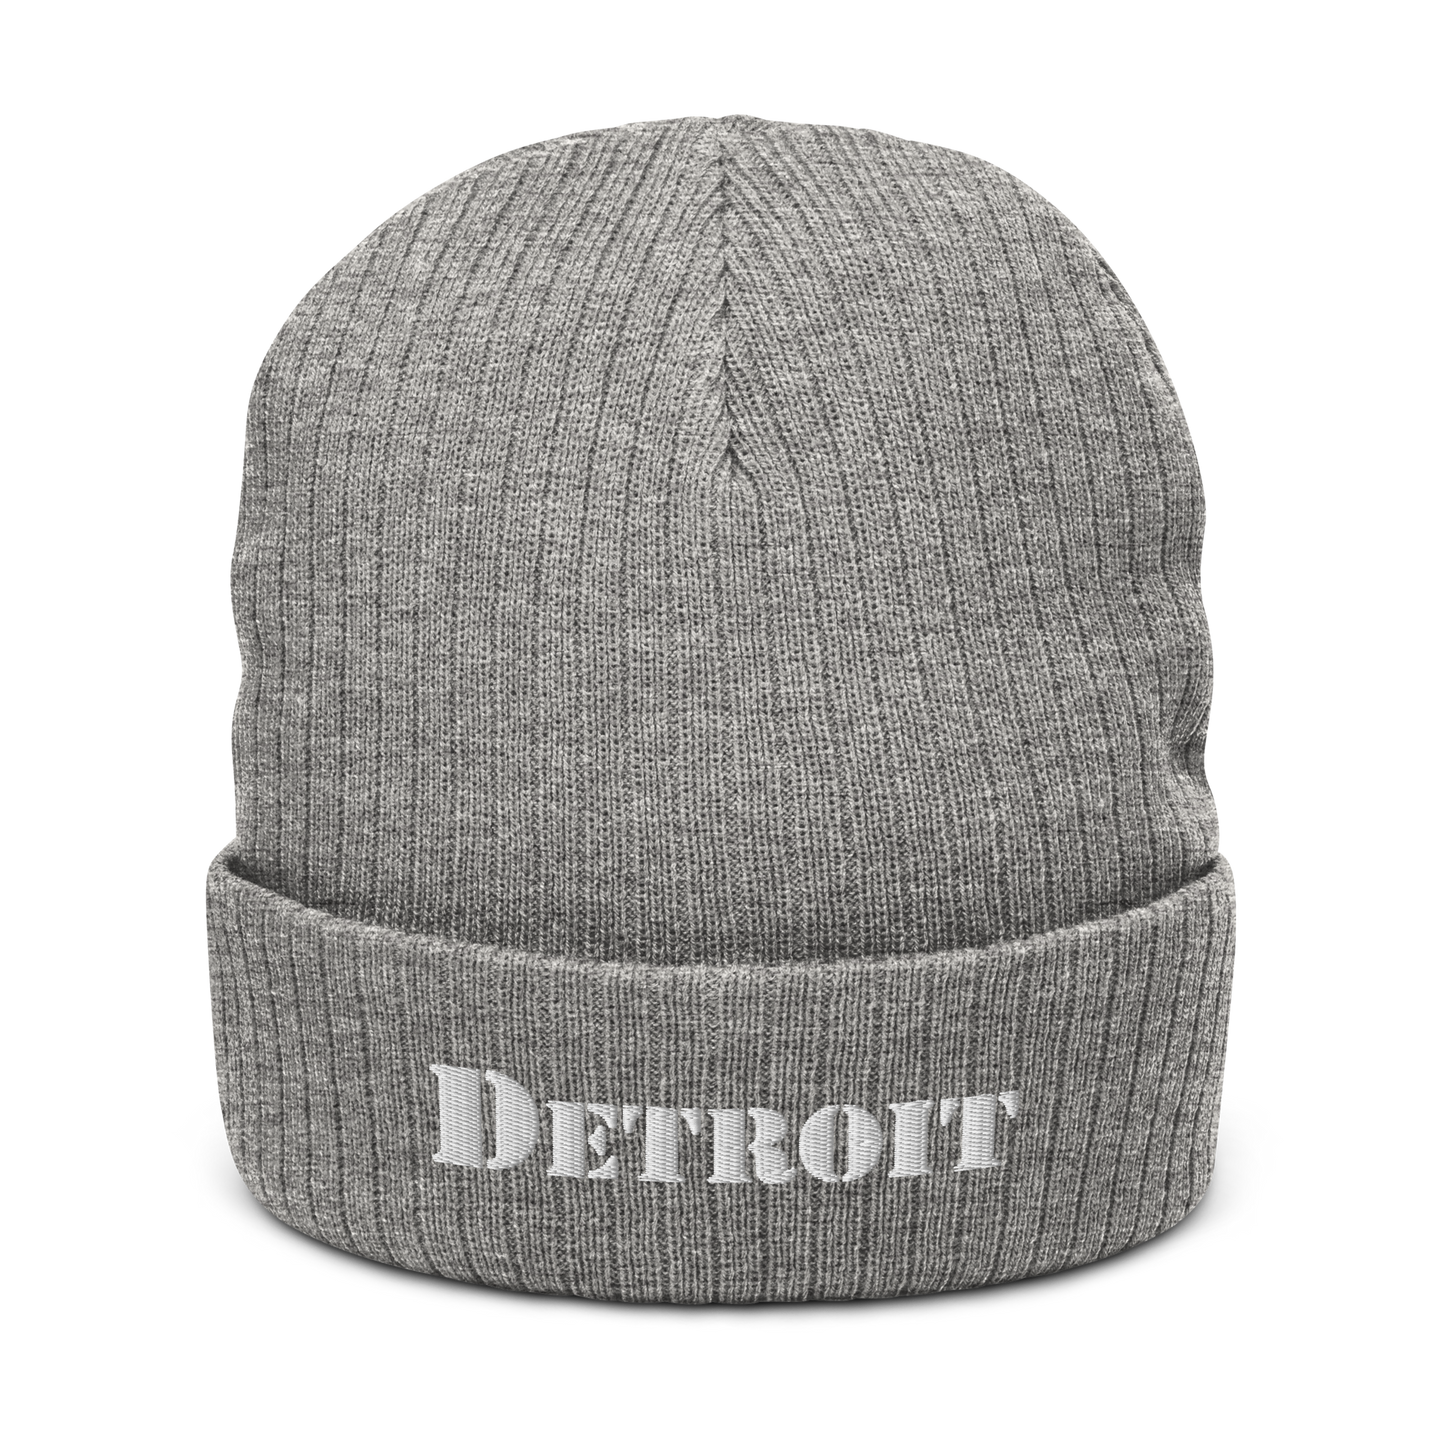 'Detroit' Ribbed Beanie (Army Font)